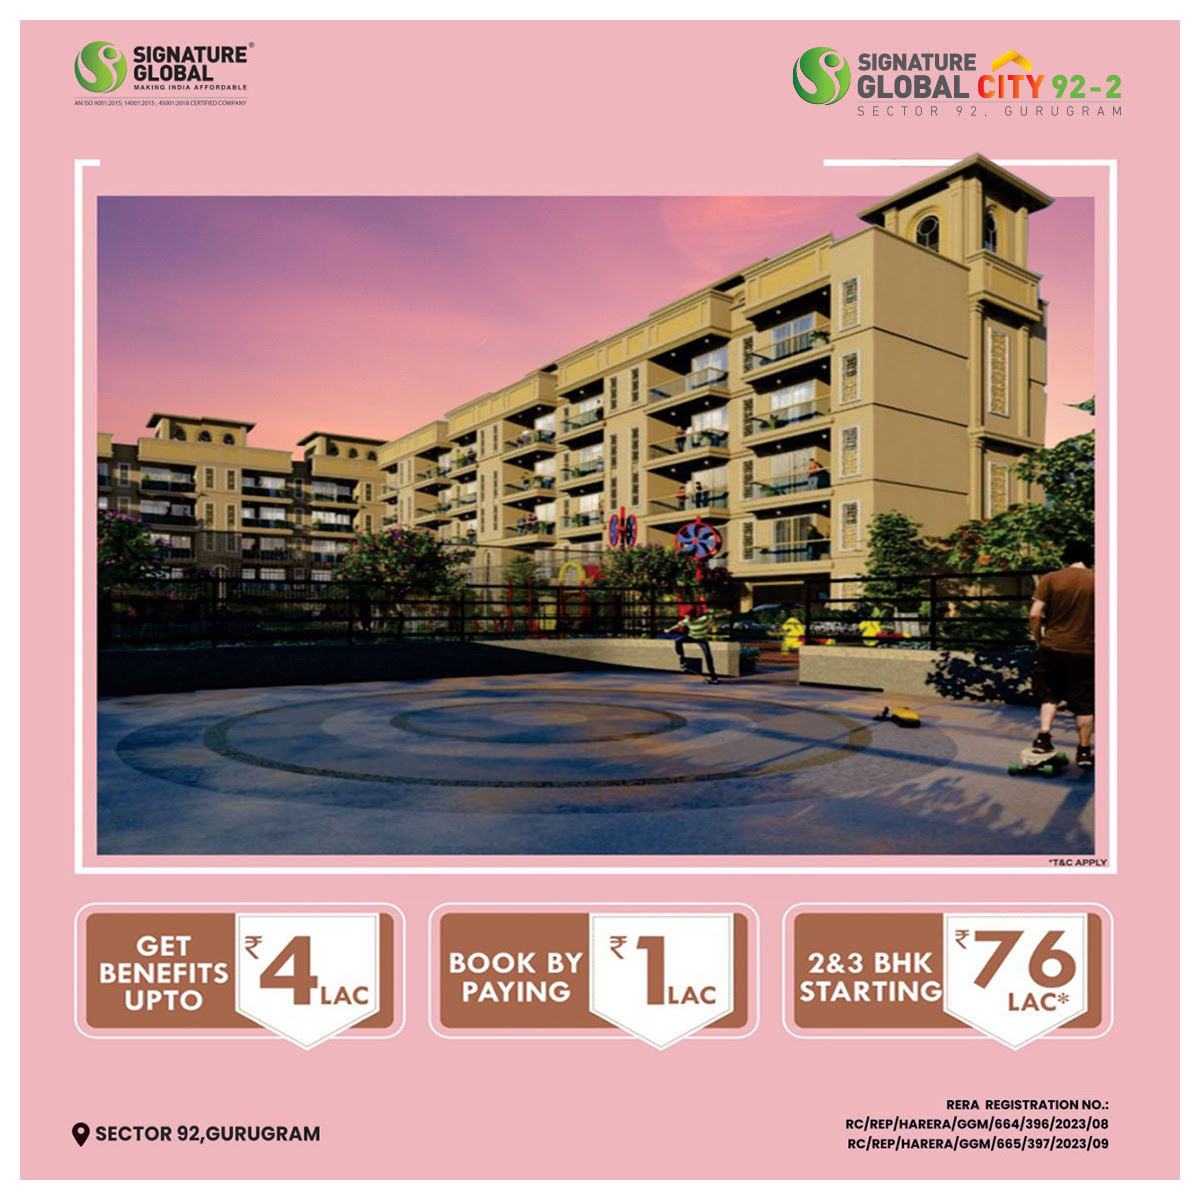 Book with Rs 1 Lac & get benefit of Rs 4 Lac and free modular kitchen at Signature Global City 92-2, Gurgaon Update